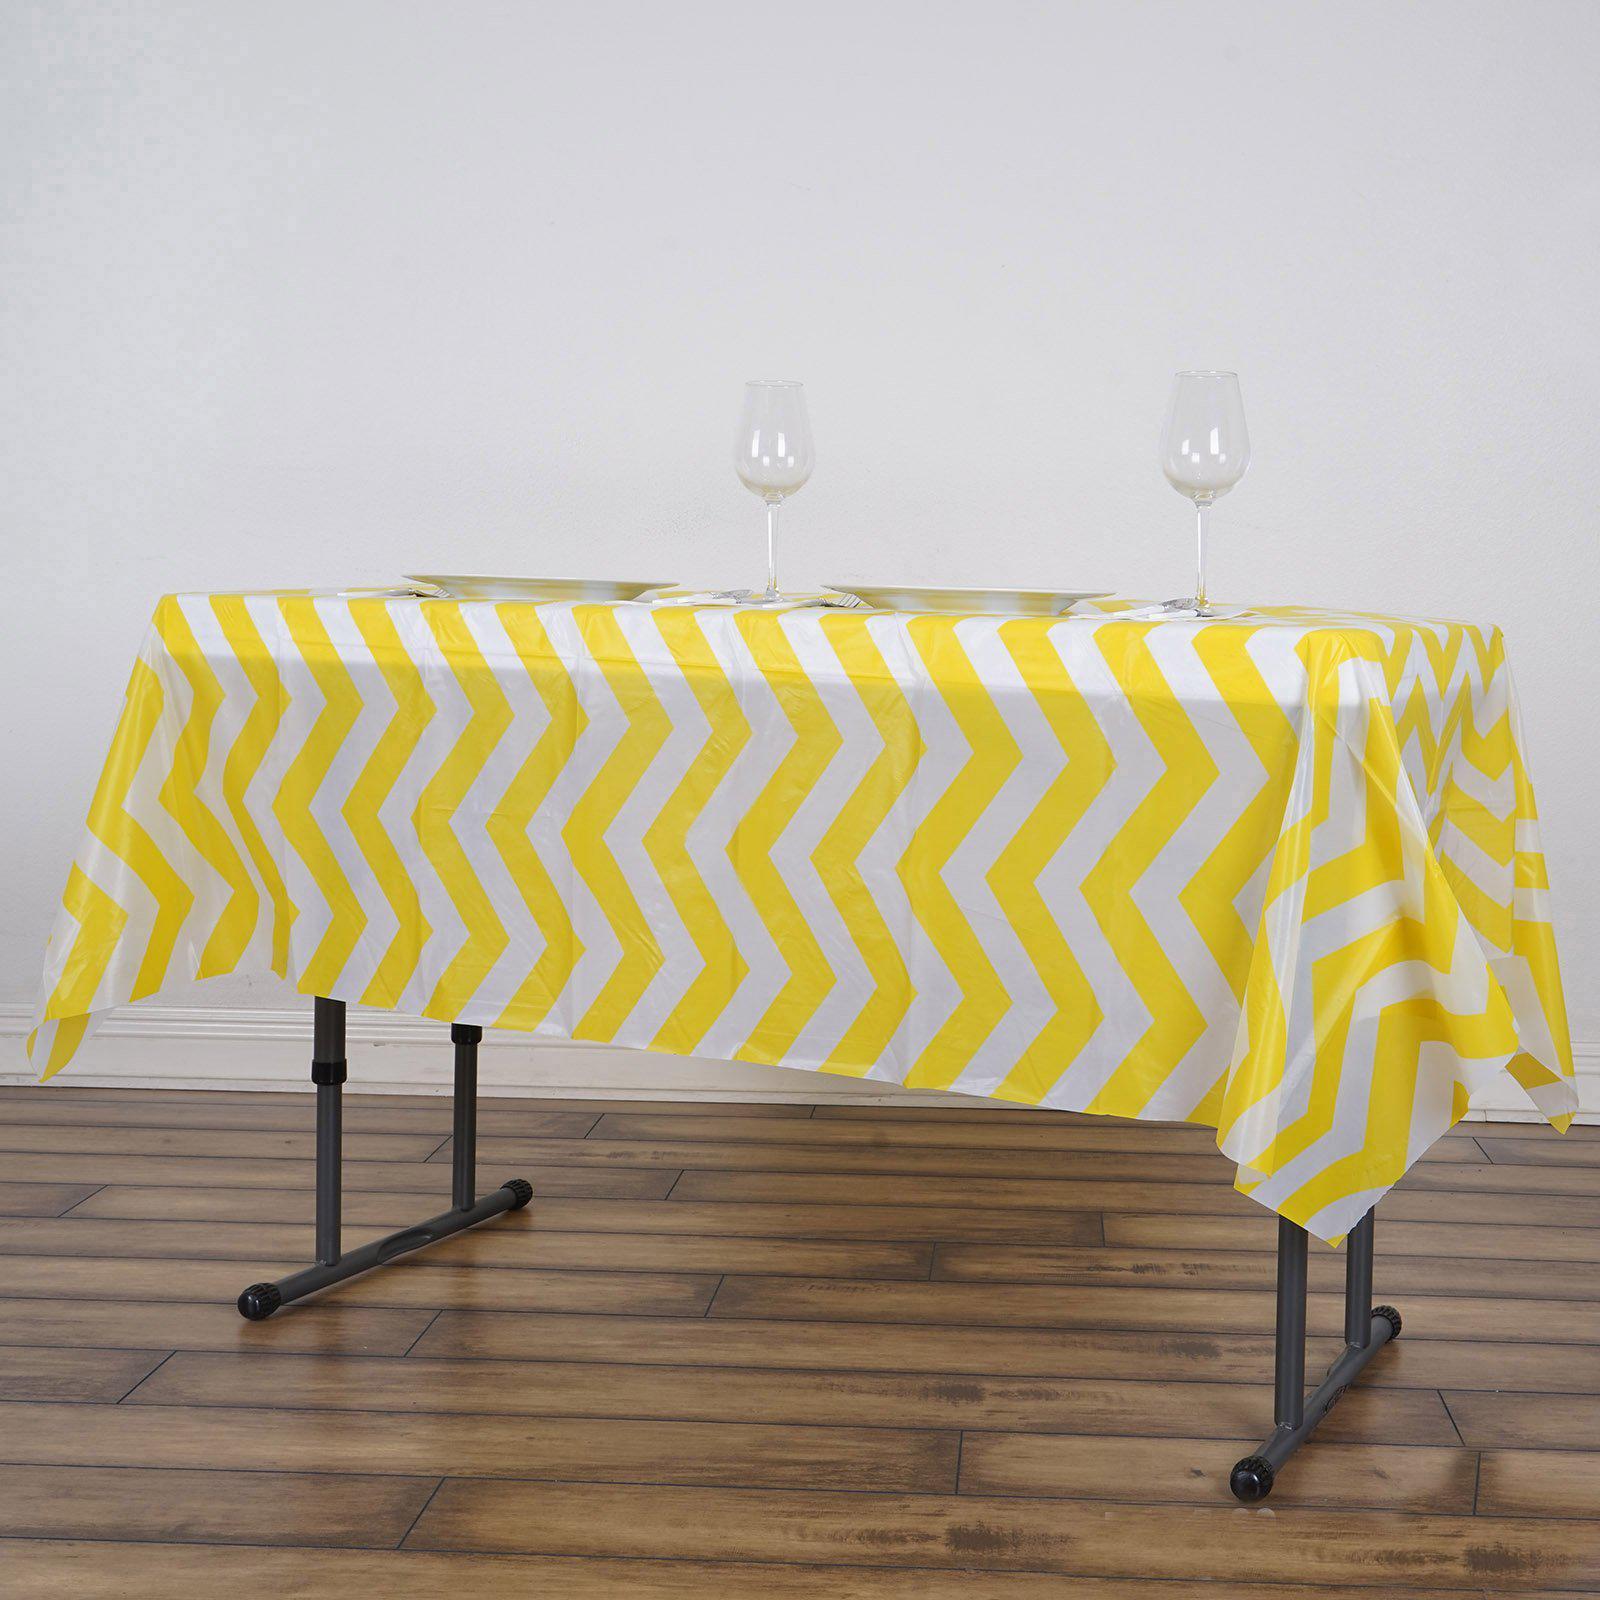 make-your-order-official-of-yellow-chevron-waterproof-plastic-tablecloth-pvc-rectangle-disposable-table-cover-54×72-online_1.jpg